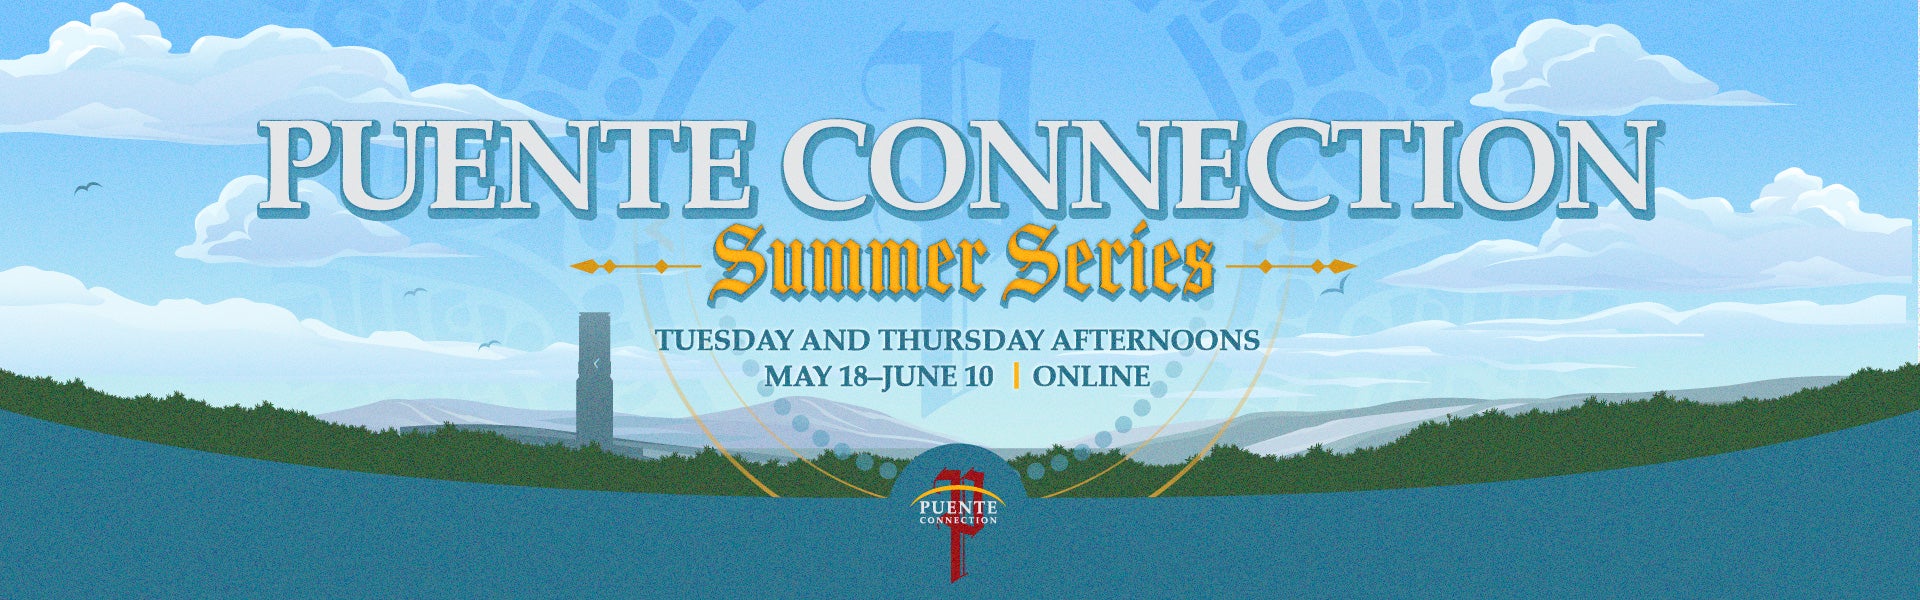 Puente Summer Series, Tuesday and Thursday Afternoons, May 18-June 10, Online